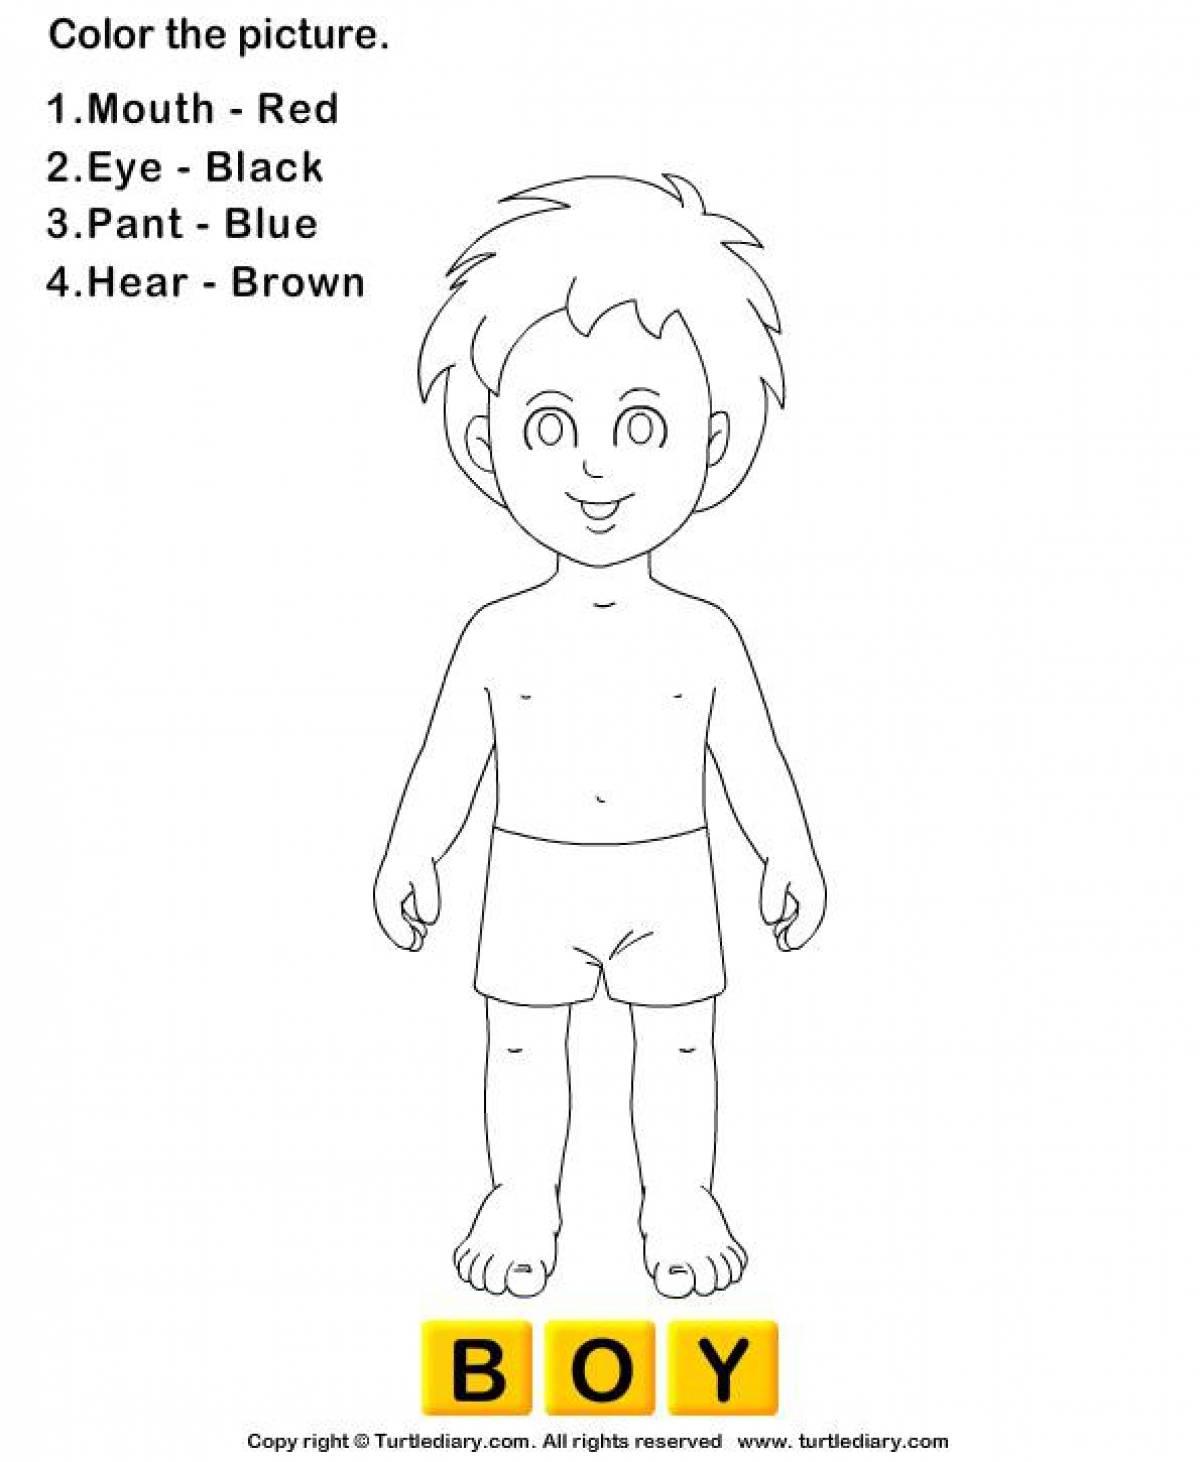 Coloring page stimulating body parts for kids